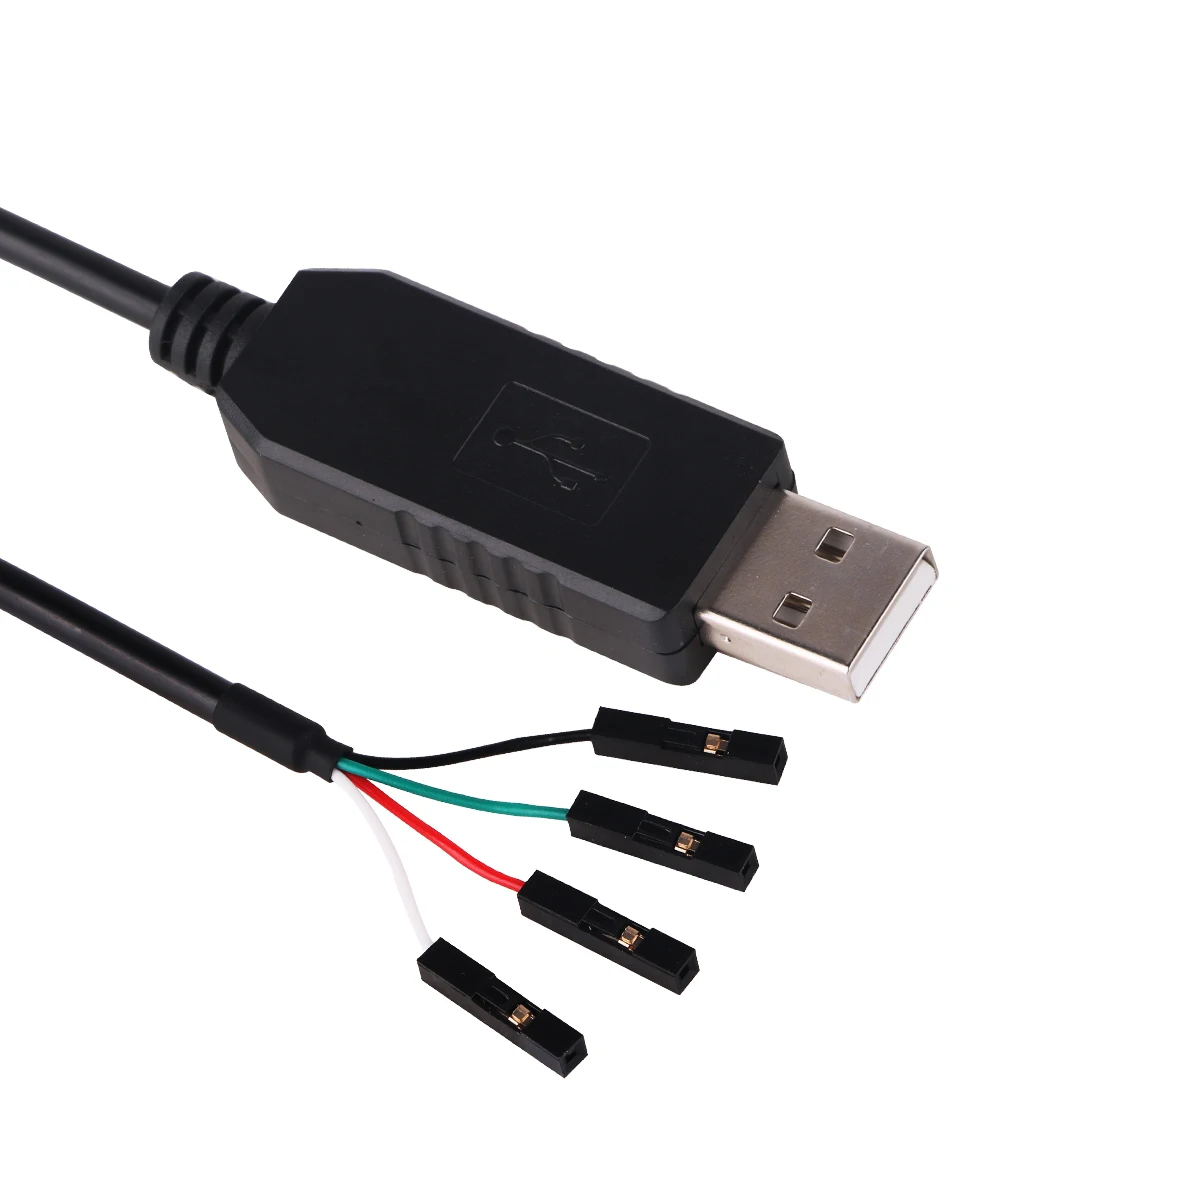 FTDI TTL-232R TTL TO USB 4-Way SIL,0.1” 2.54mm Pitch 4 Pin Terminal Block Adapter Connector Serial Converter Cable usb to uart 5v 3 3v ttl level signals serial converter cable compatible for ttl 232r 5v 3 3v we